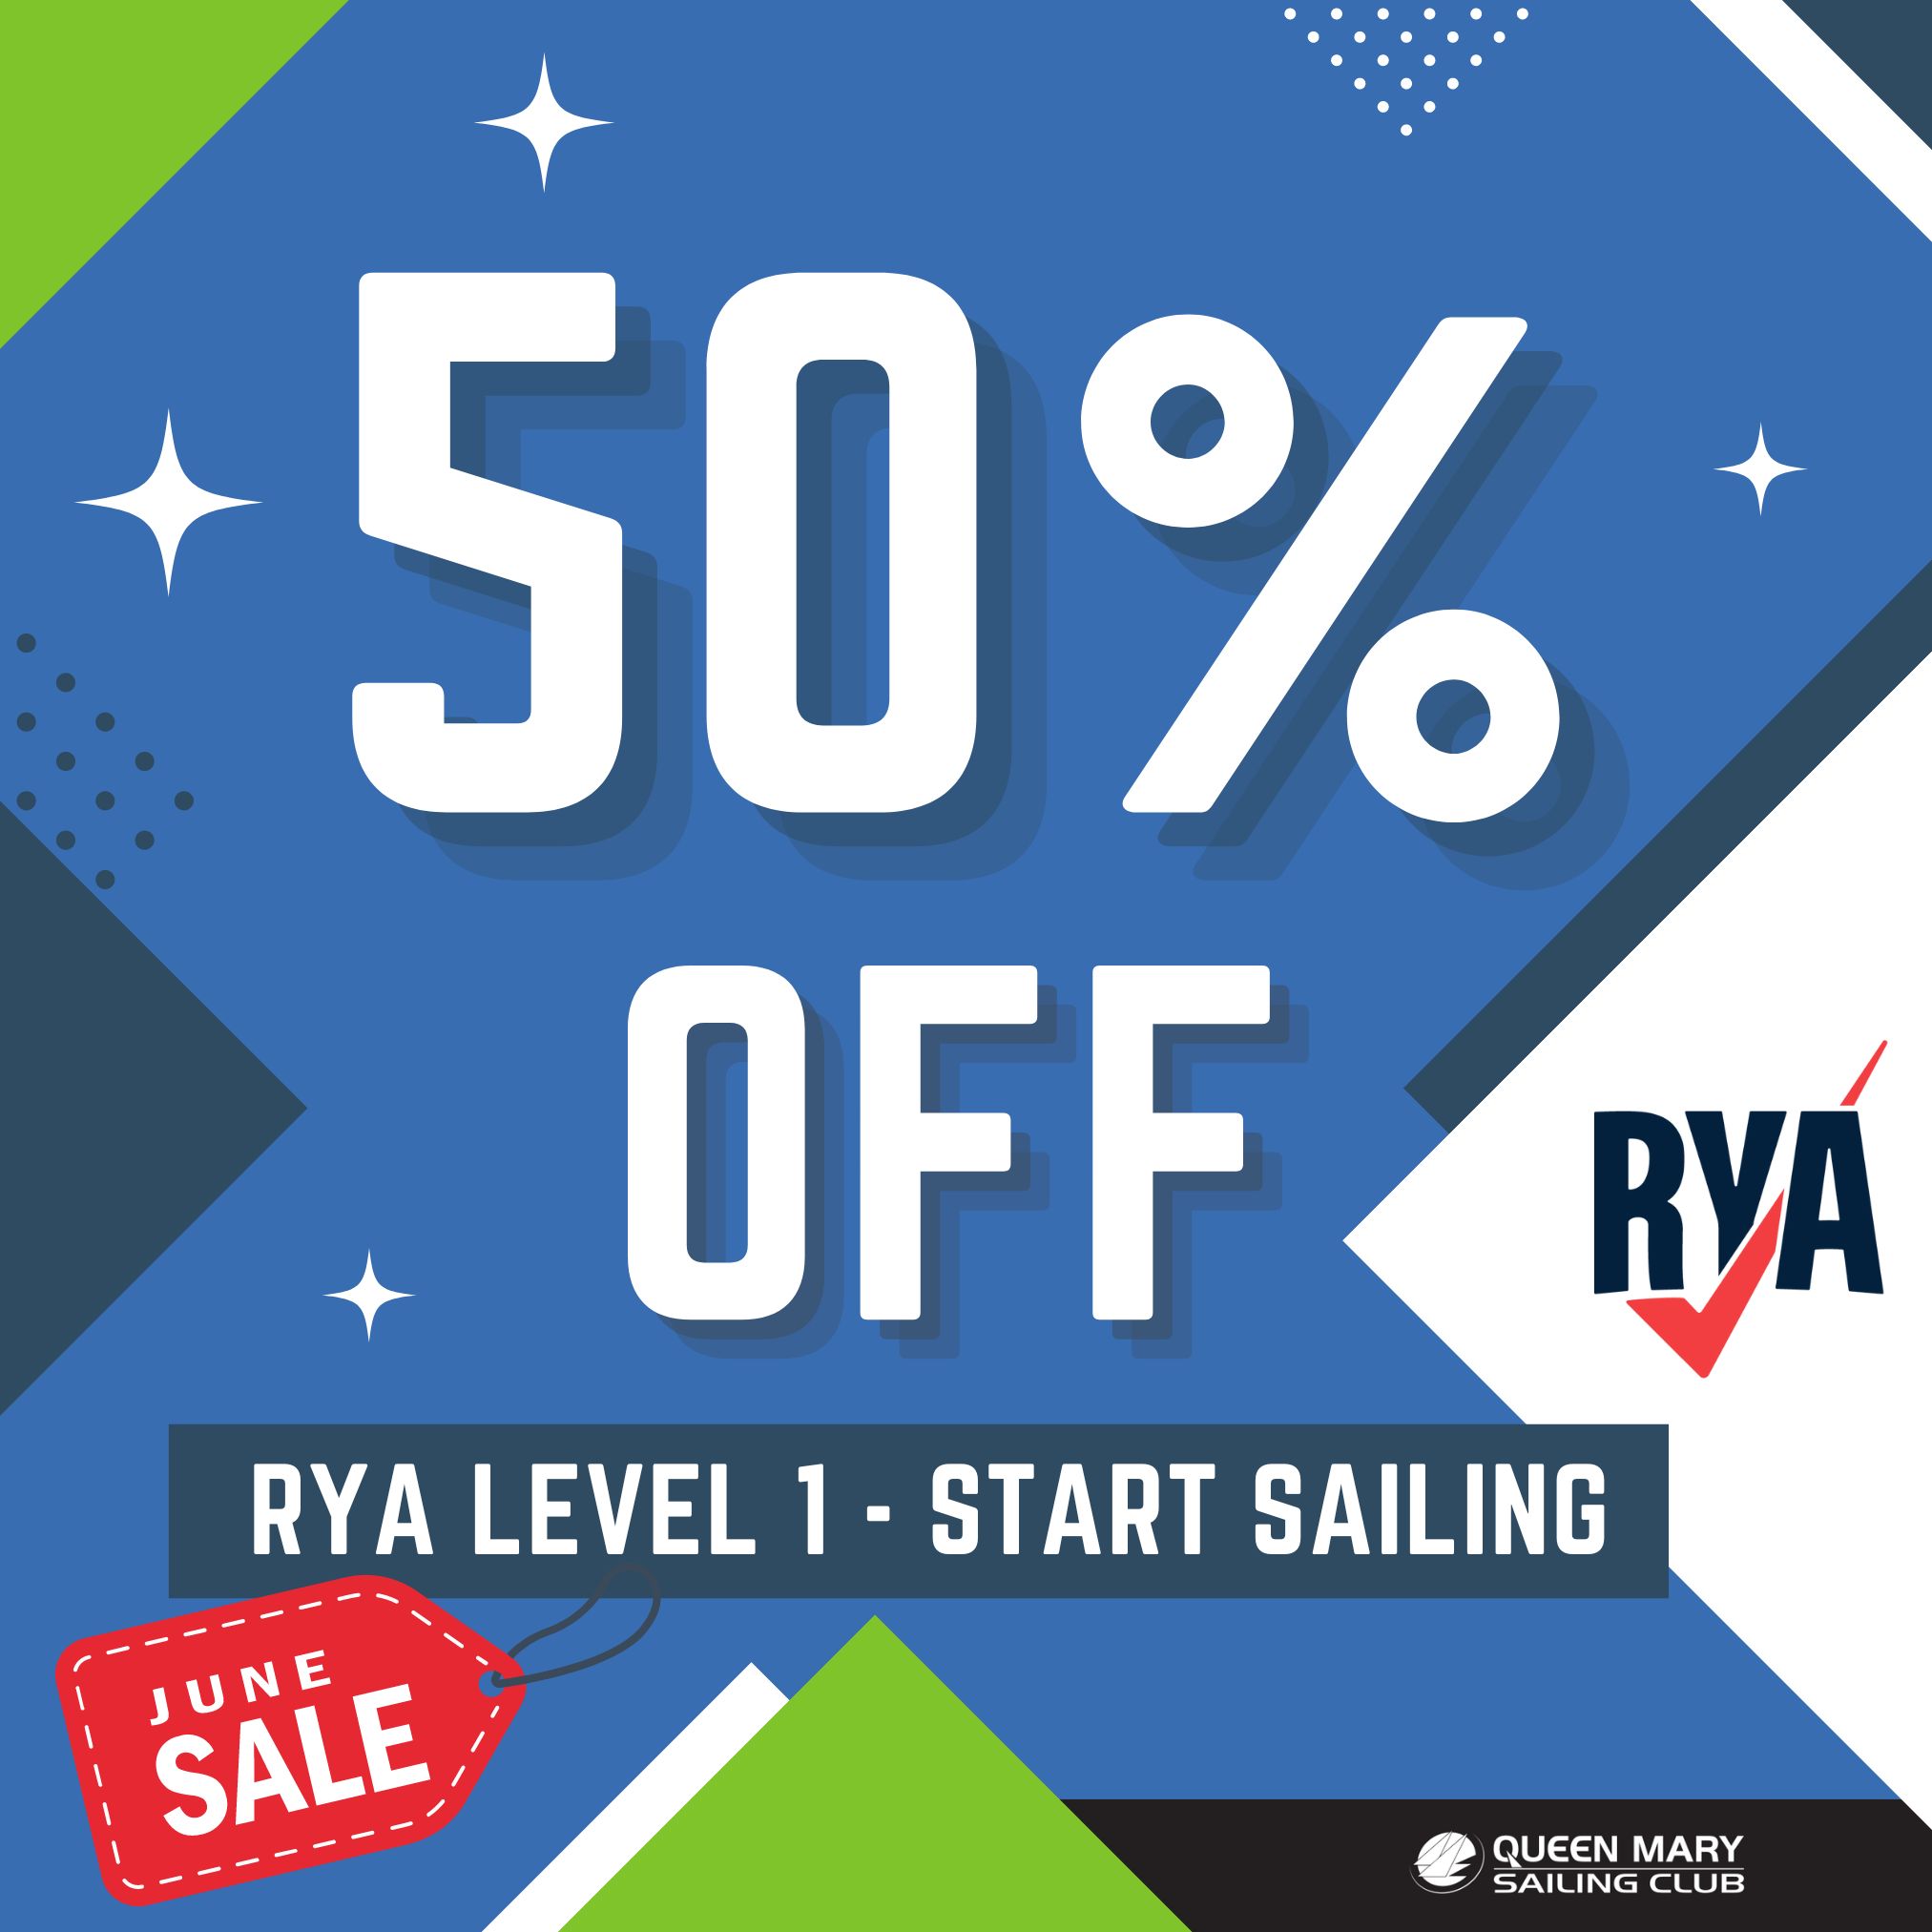 50 off Discount Saving Offer Discounted RYA Level 1 Sailing Course2